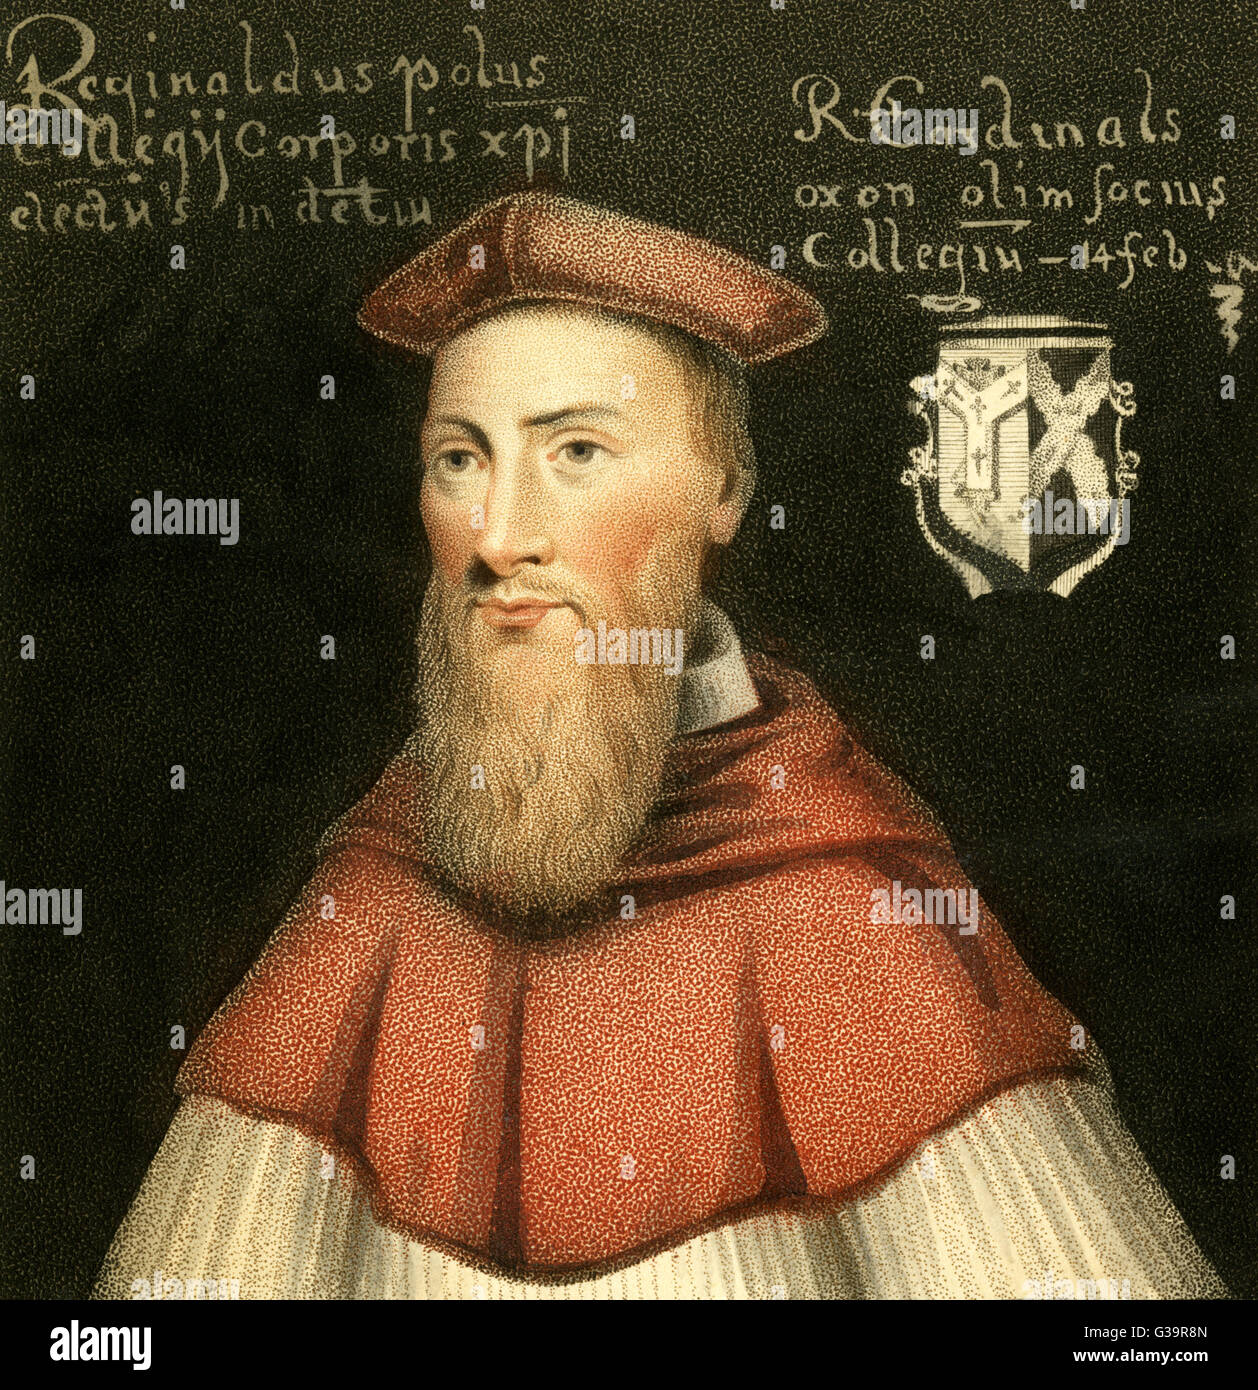 Reginald pole hi-res stock photography and images - Alamy